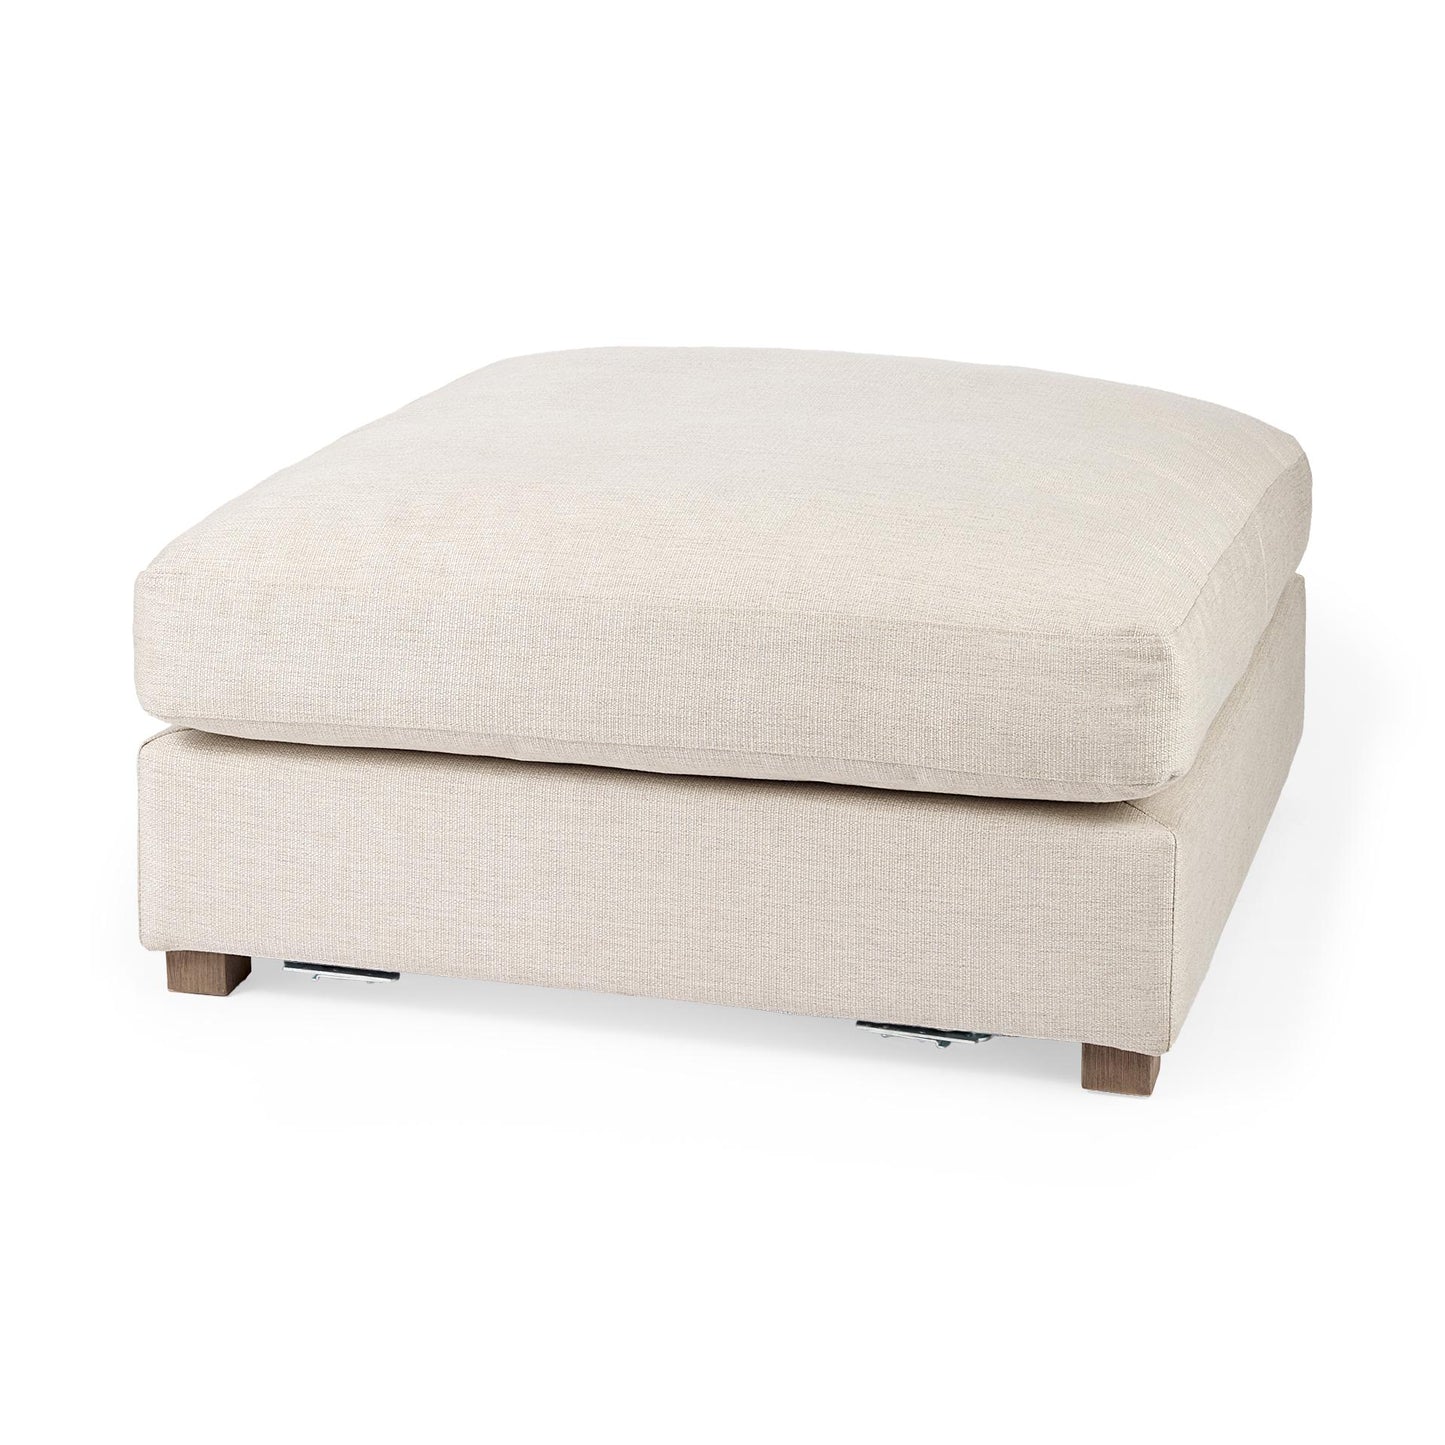 Valence 38.6L x 38.6W x 17.7H Beige Full Size Ottoman Sectional Piece